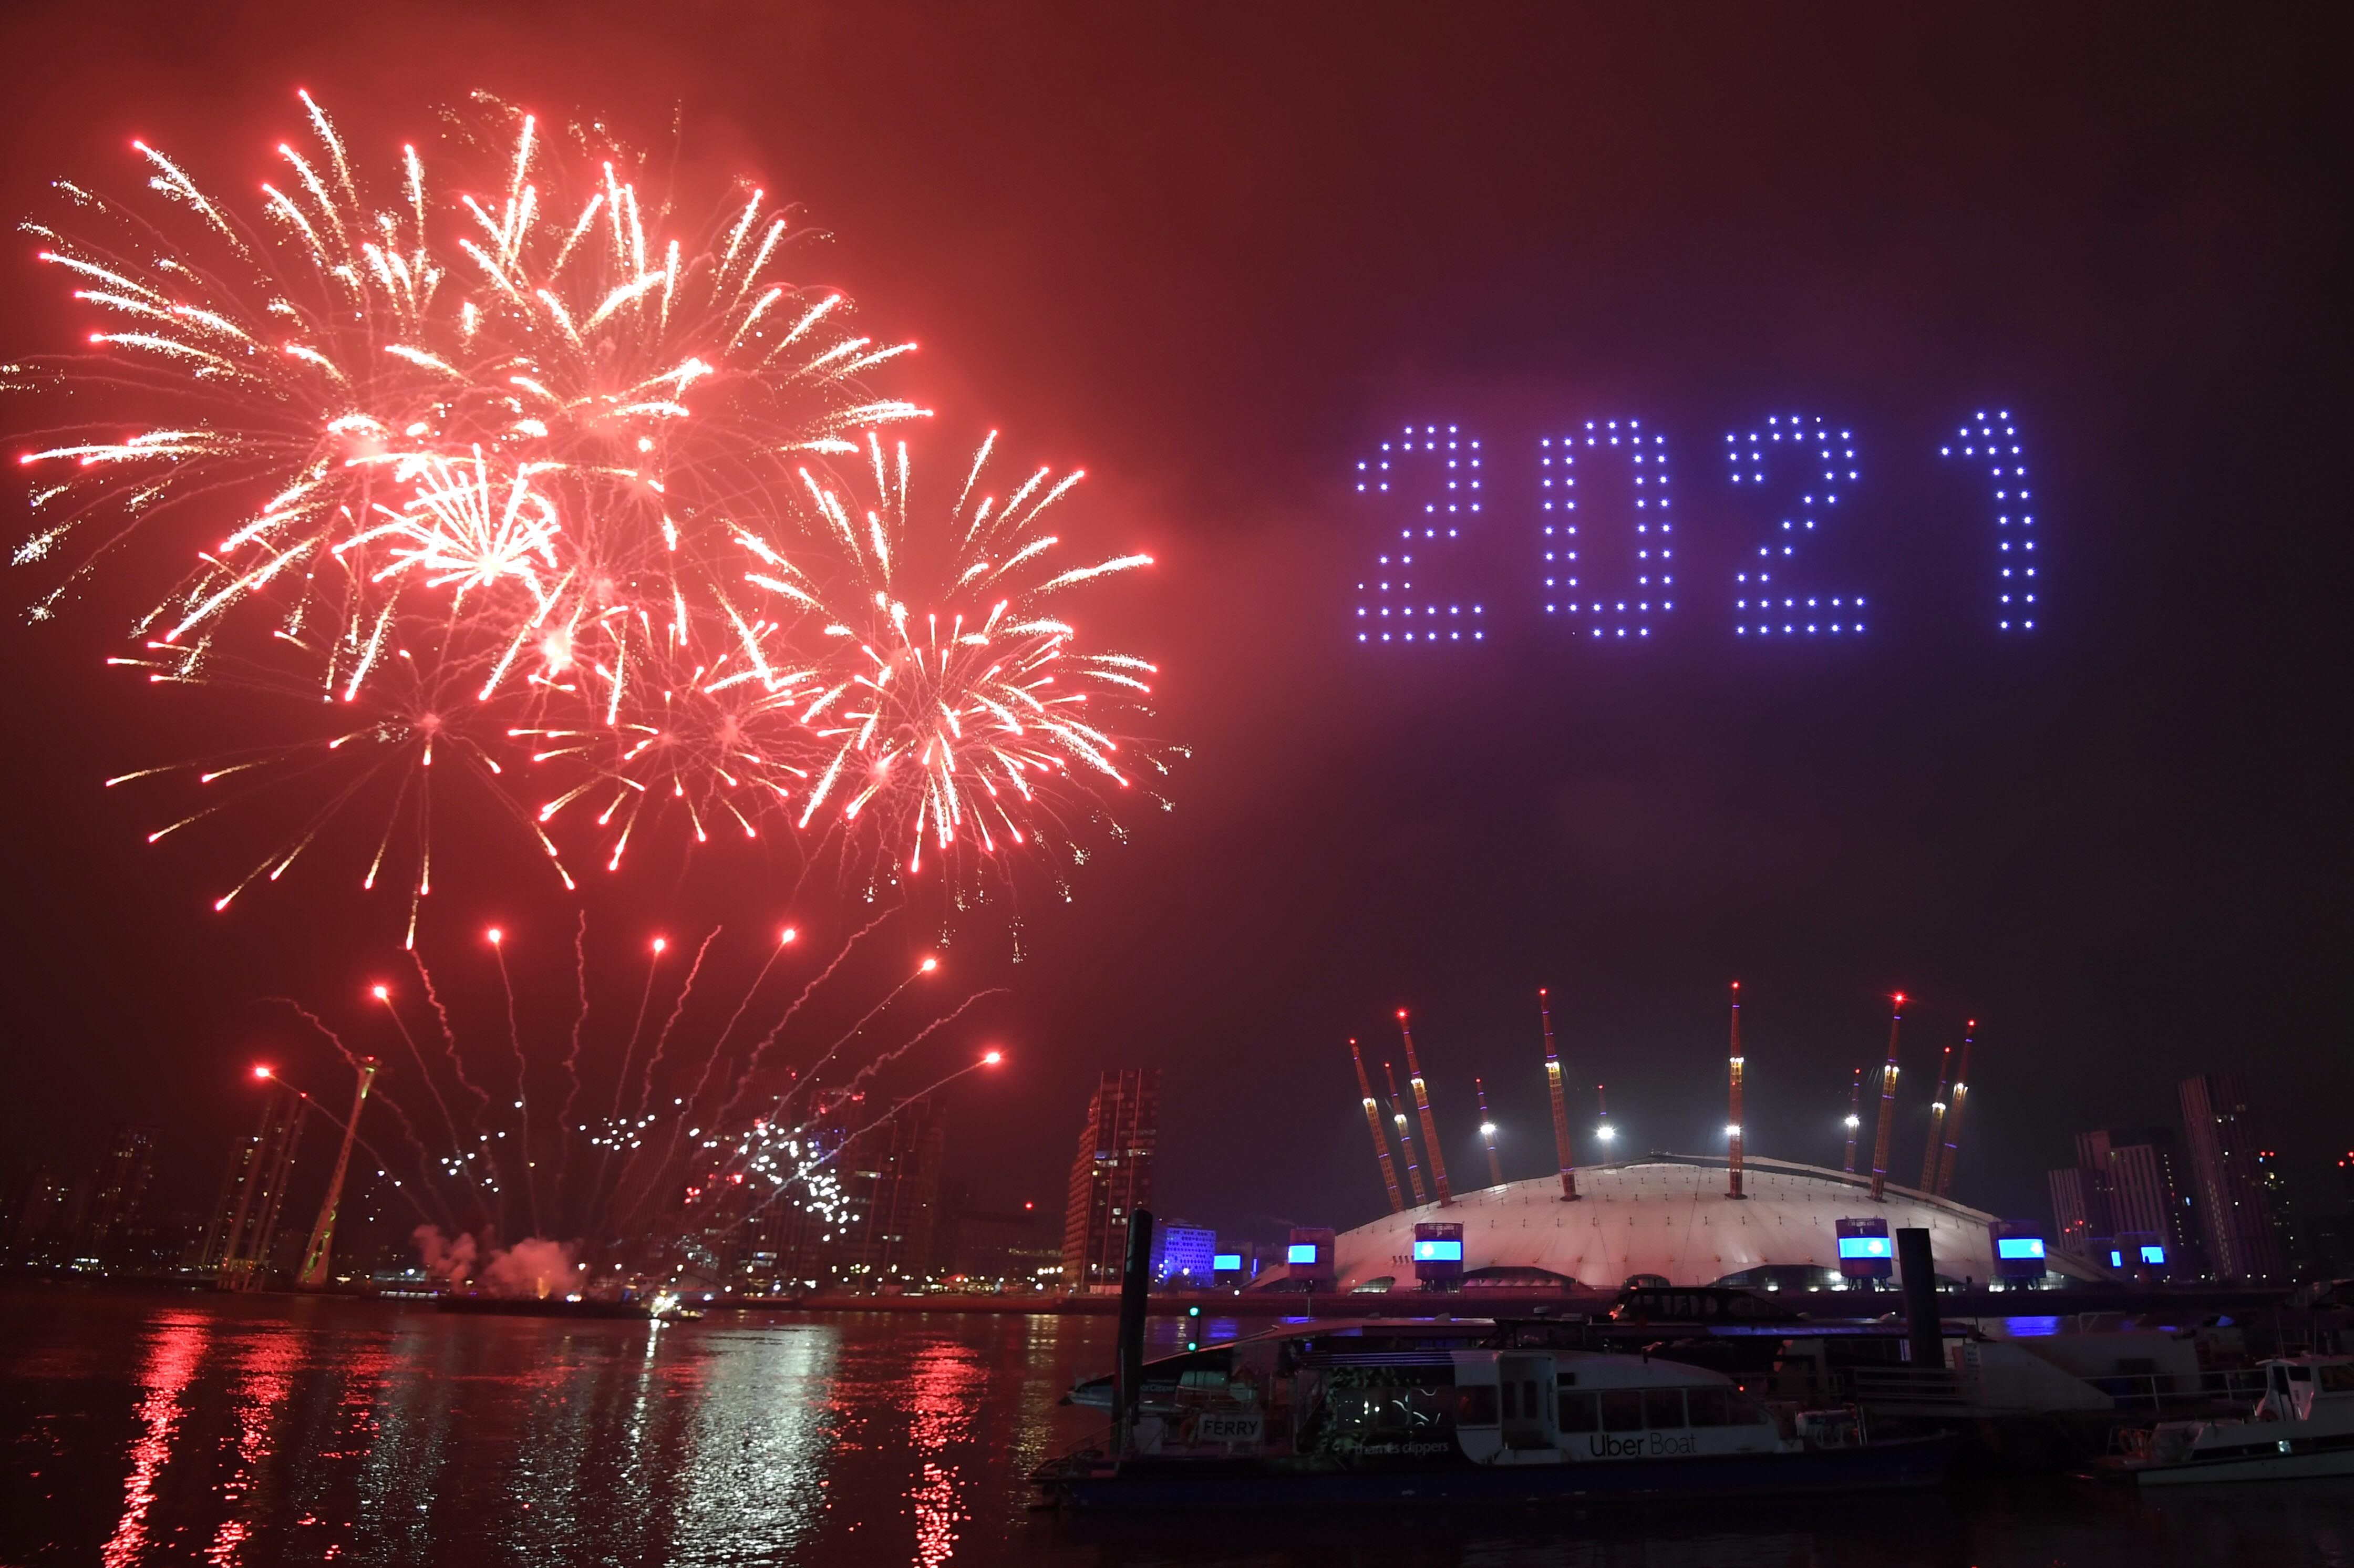 Fireworks and drones illuminate the night sky over the The O2 in London as they form a light display as London's normal New Year's Eve fireworks display was cancelled due to the coronavirus pandemic